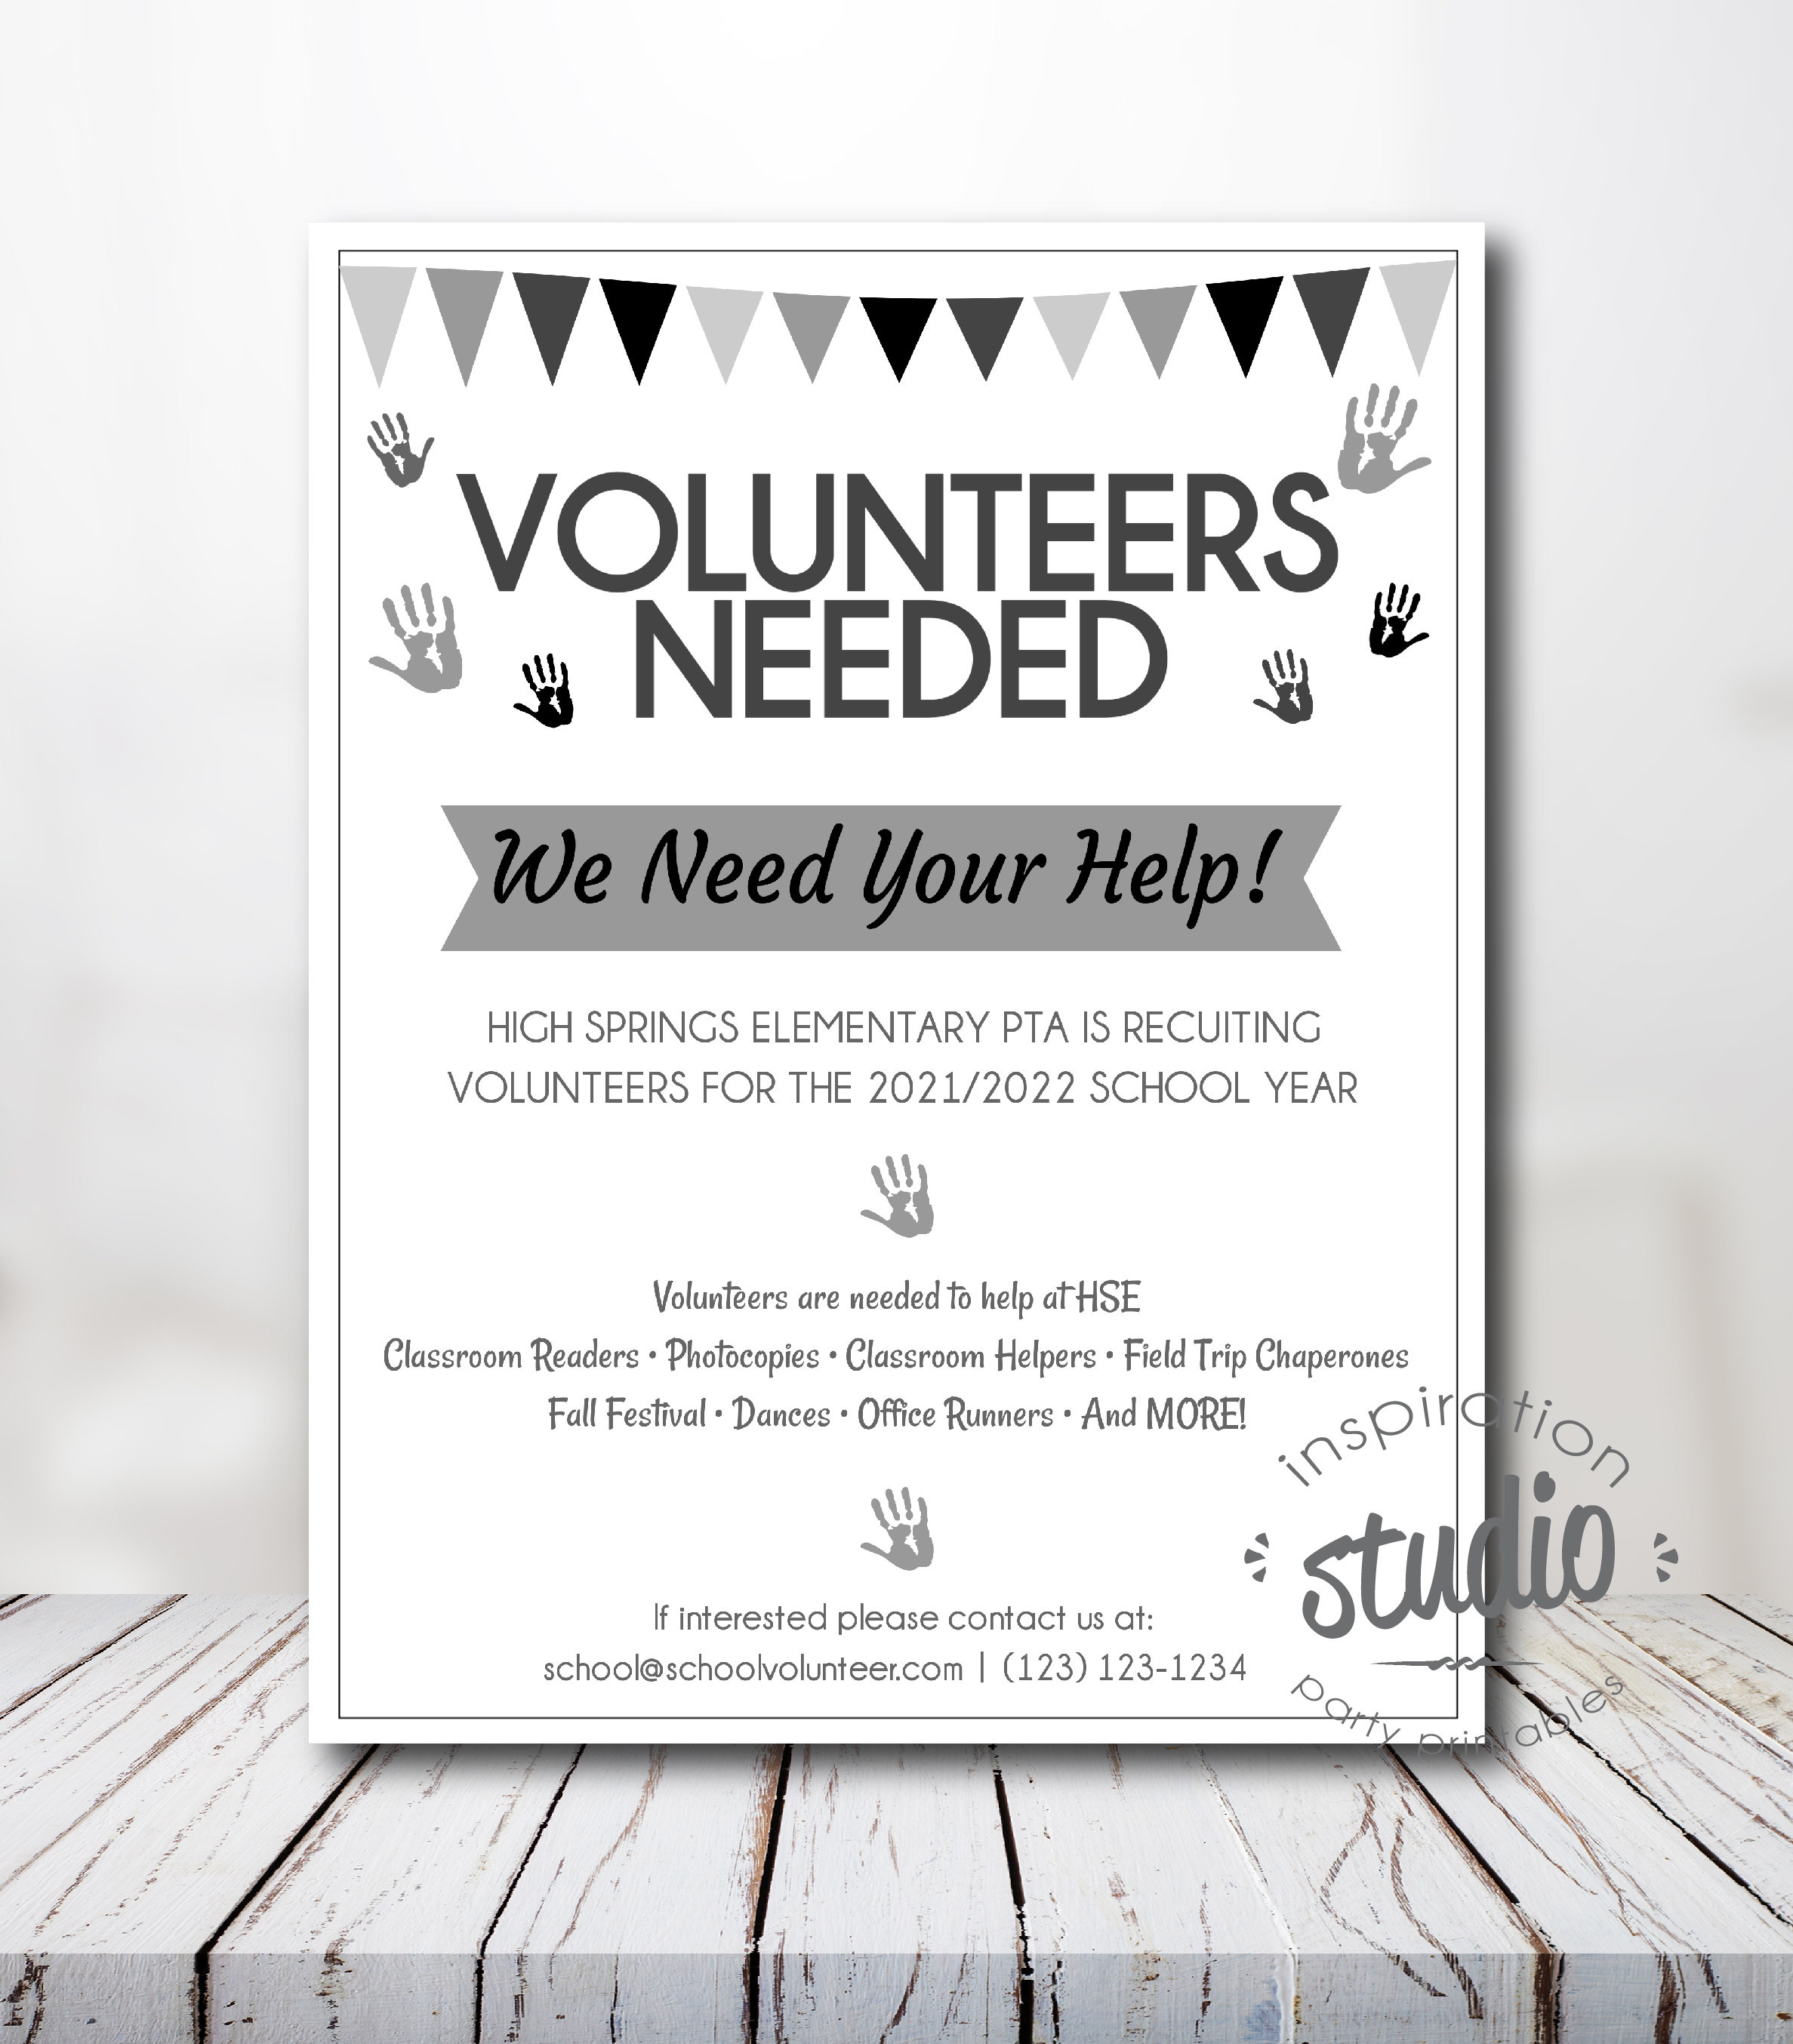 Volunteers Needed Flyer Template, Back to School Flyer, Volunteer Event,  PTA, PTO, School Flyer, Easy to use template, Black and White Throughout Volunteers Needed Flyer Template